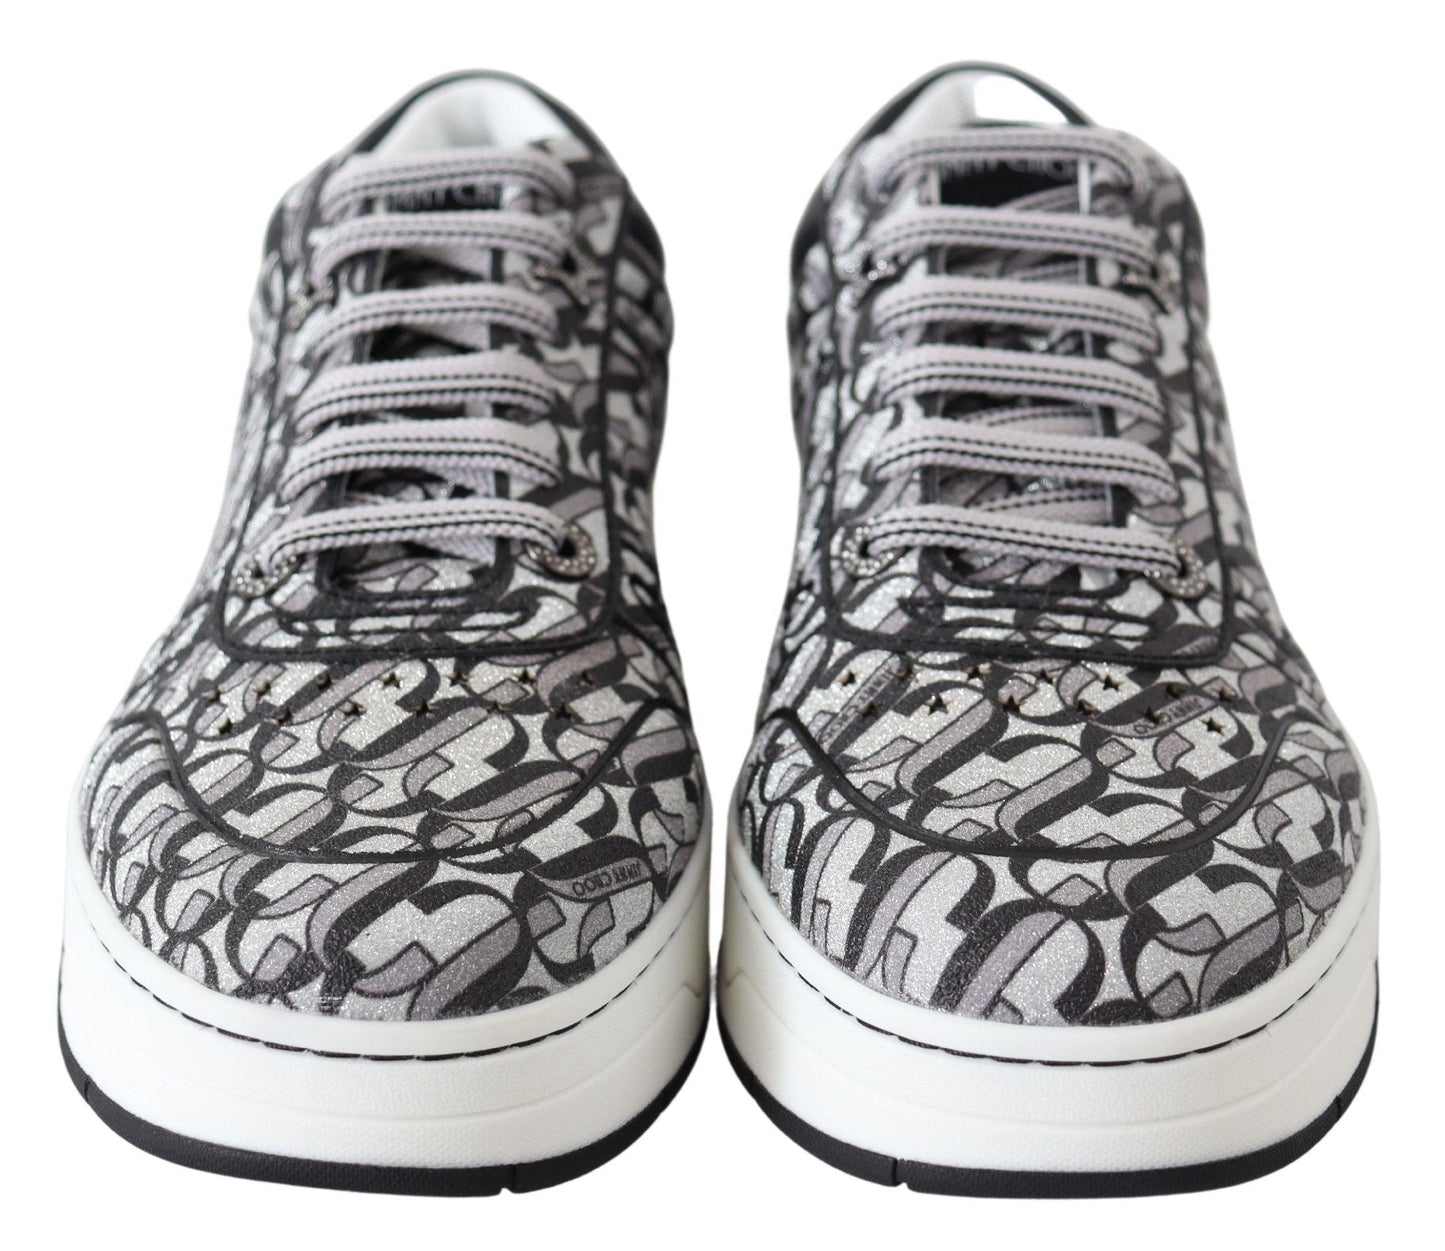 Jimmy Choo Women's Silver Black Glitter Hawaii Sneakers - Designed by Jimmy Choo Available to Buy at a Discounted Price on Moon Behind The Hill Online Designer Discount Store